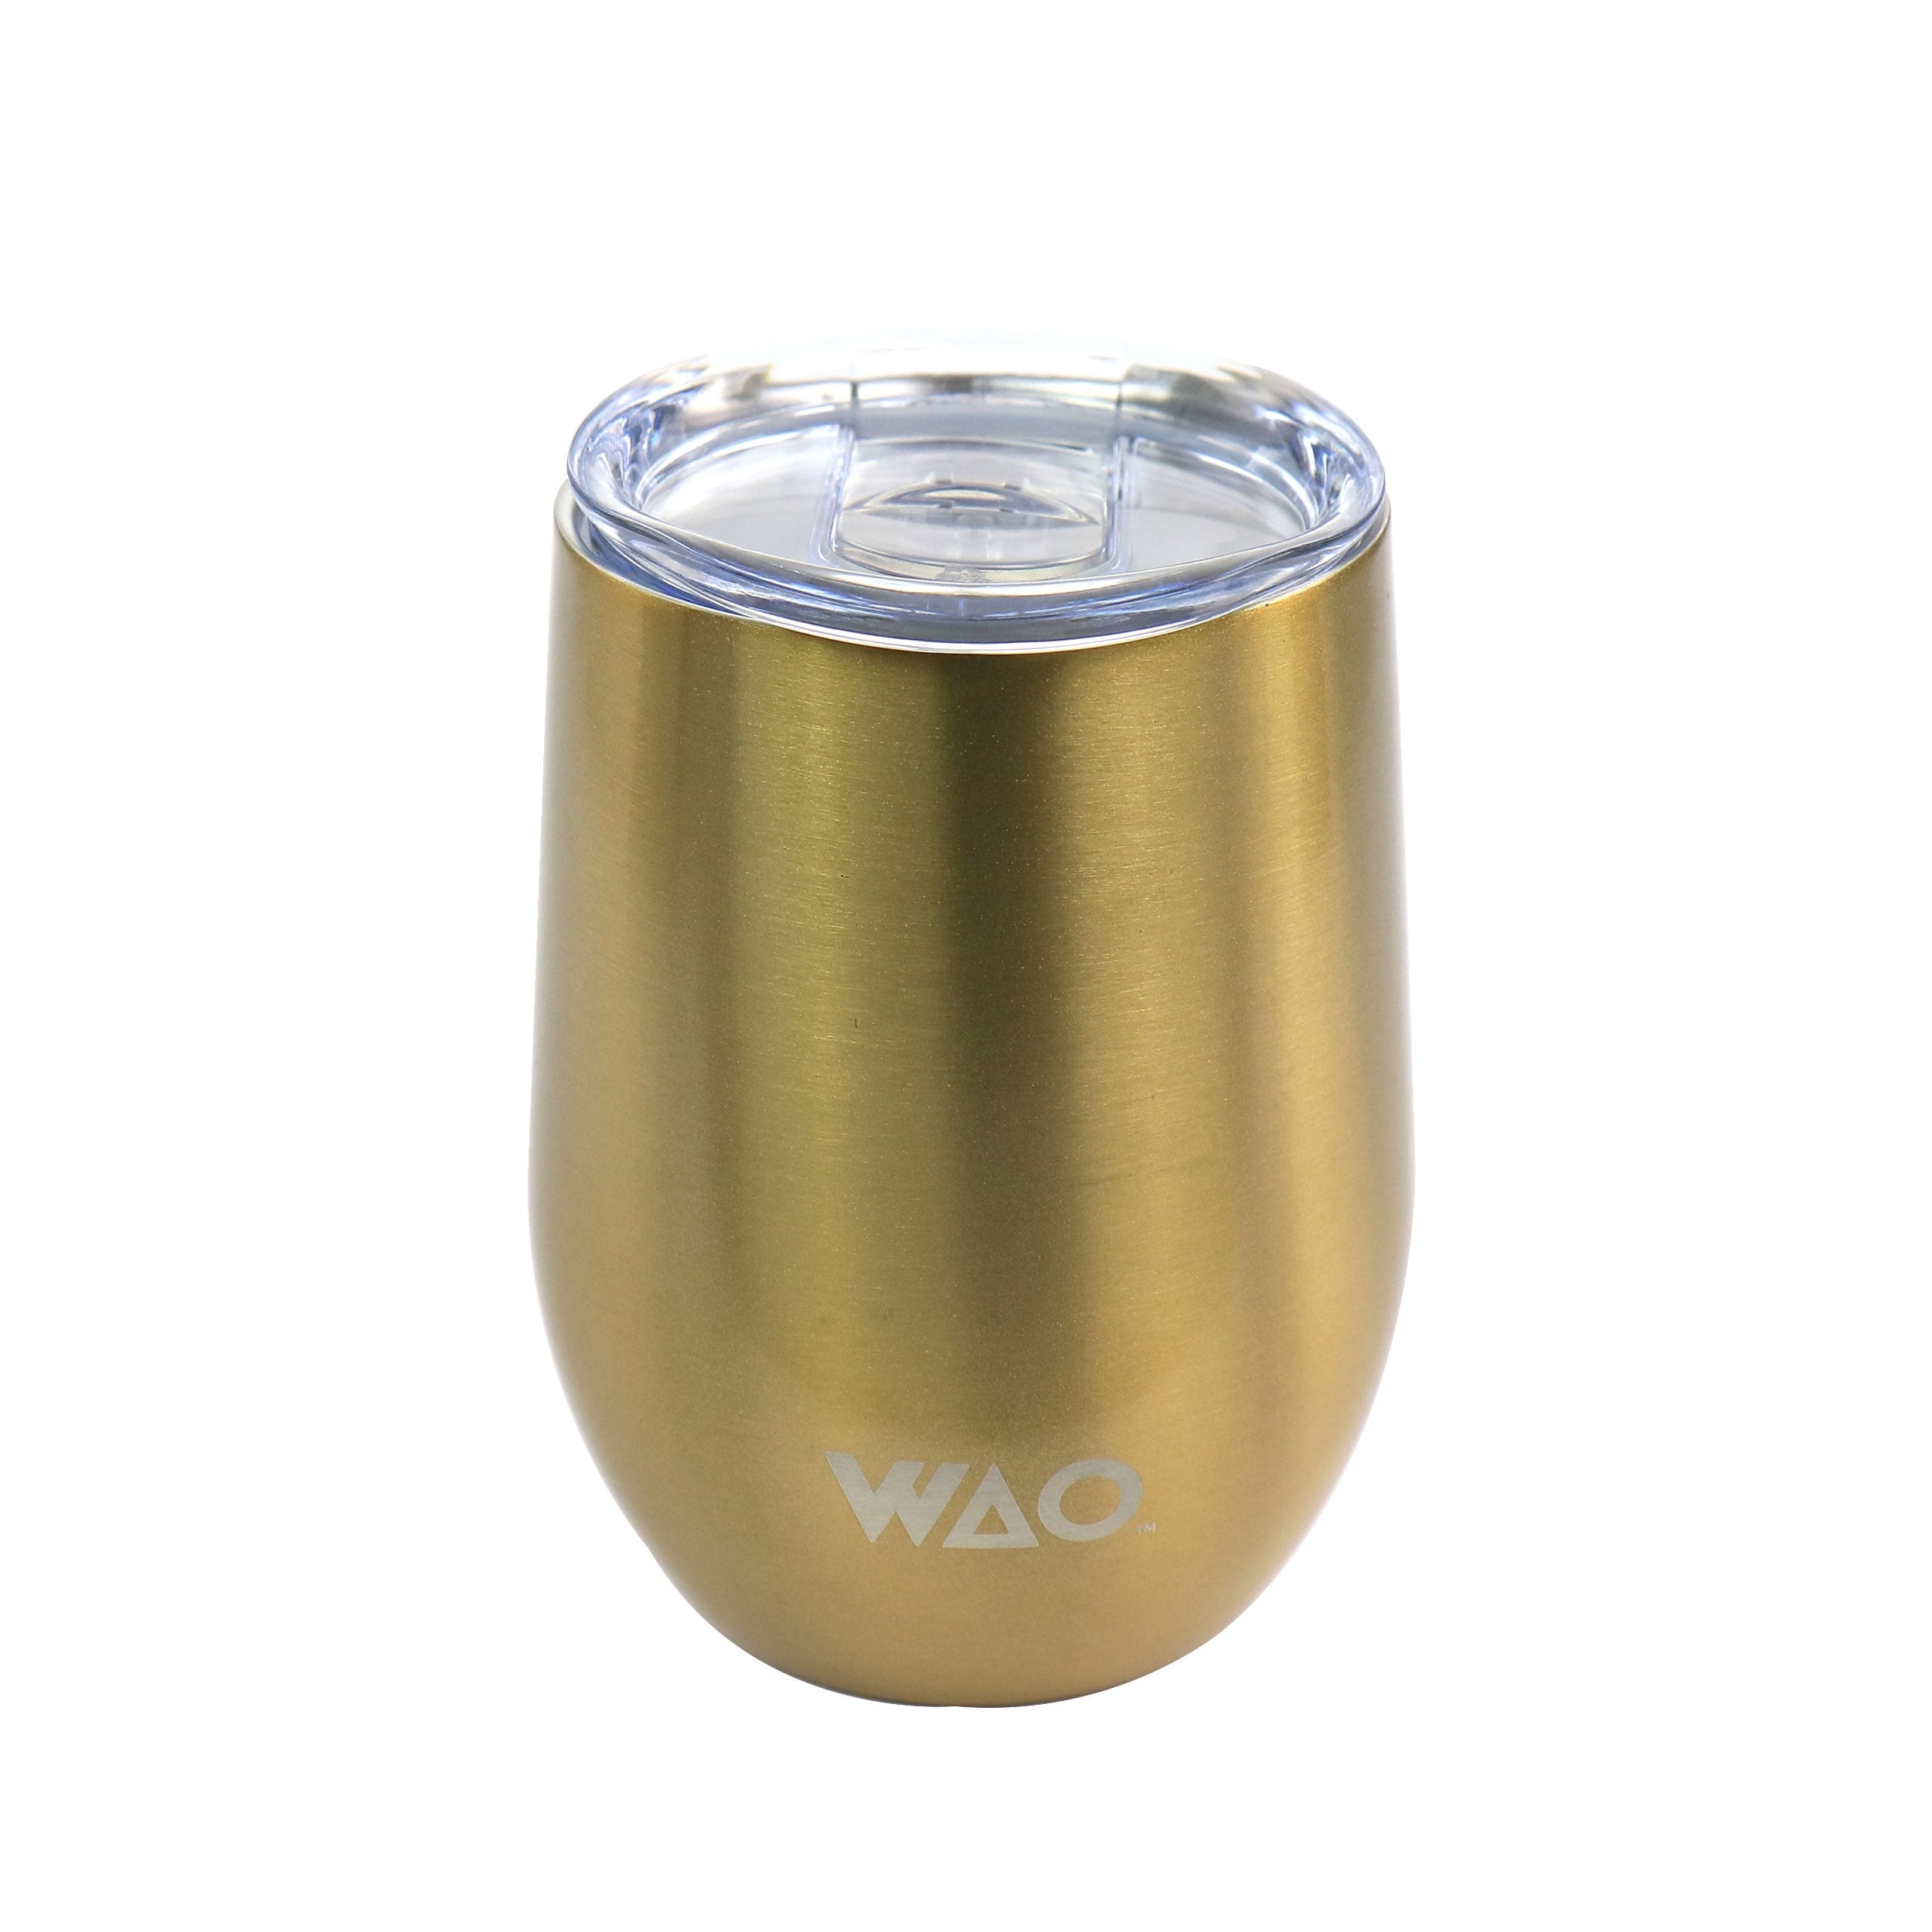 https://ak1.ostkcdn.com/images/products/is/images/direct/354ddeb72490a07495b1d2e029cf3656bbebefa3/WAO-12-Ounce-Thermal-Wine-Tumbler-with-Lid-in-Gold.jpg